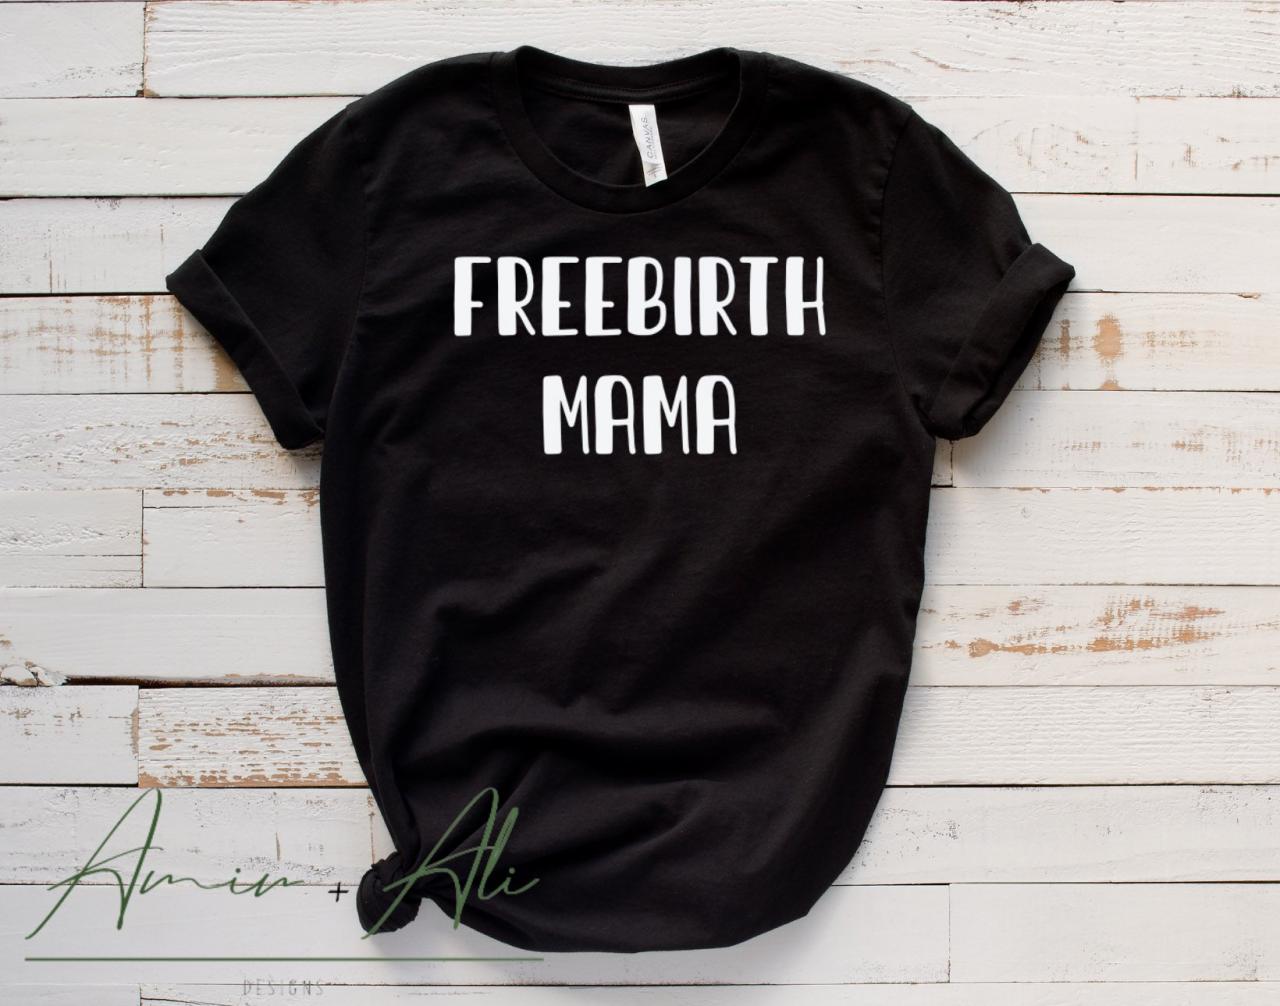 Freebirth Mama Shirt, Home Birth Gift, Midwife Gift, Personalized Baby Gift, Doula gift, Baby shower gift, home birth supplies, water birth